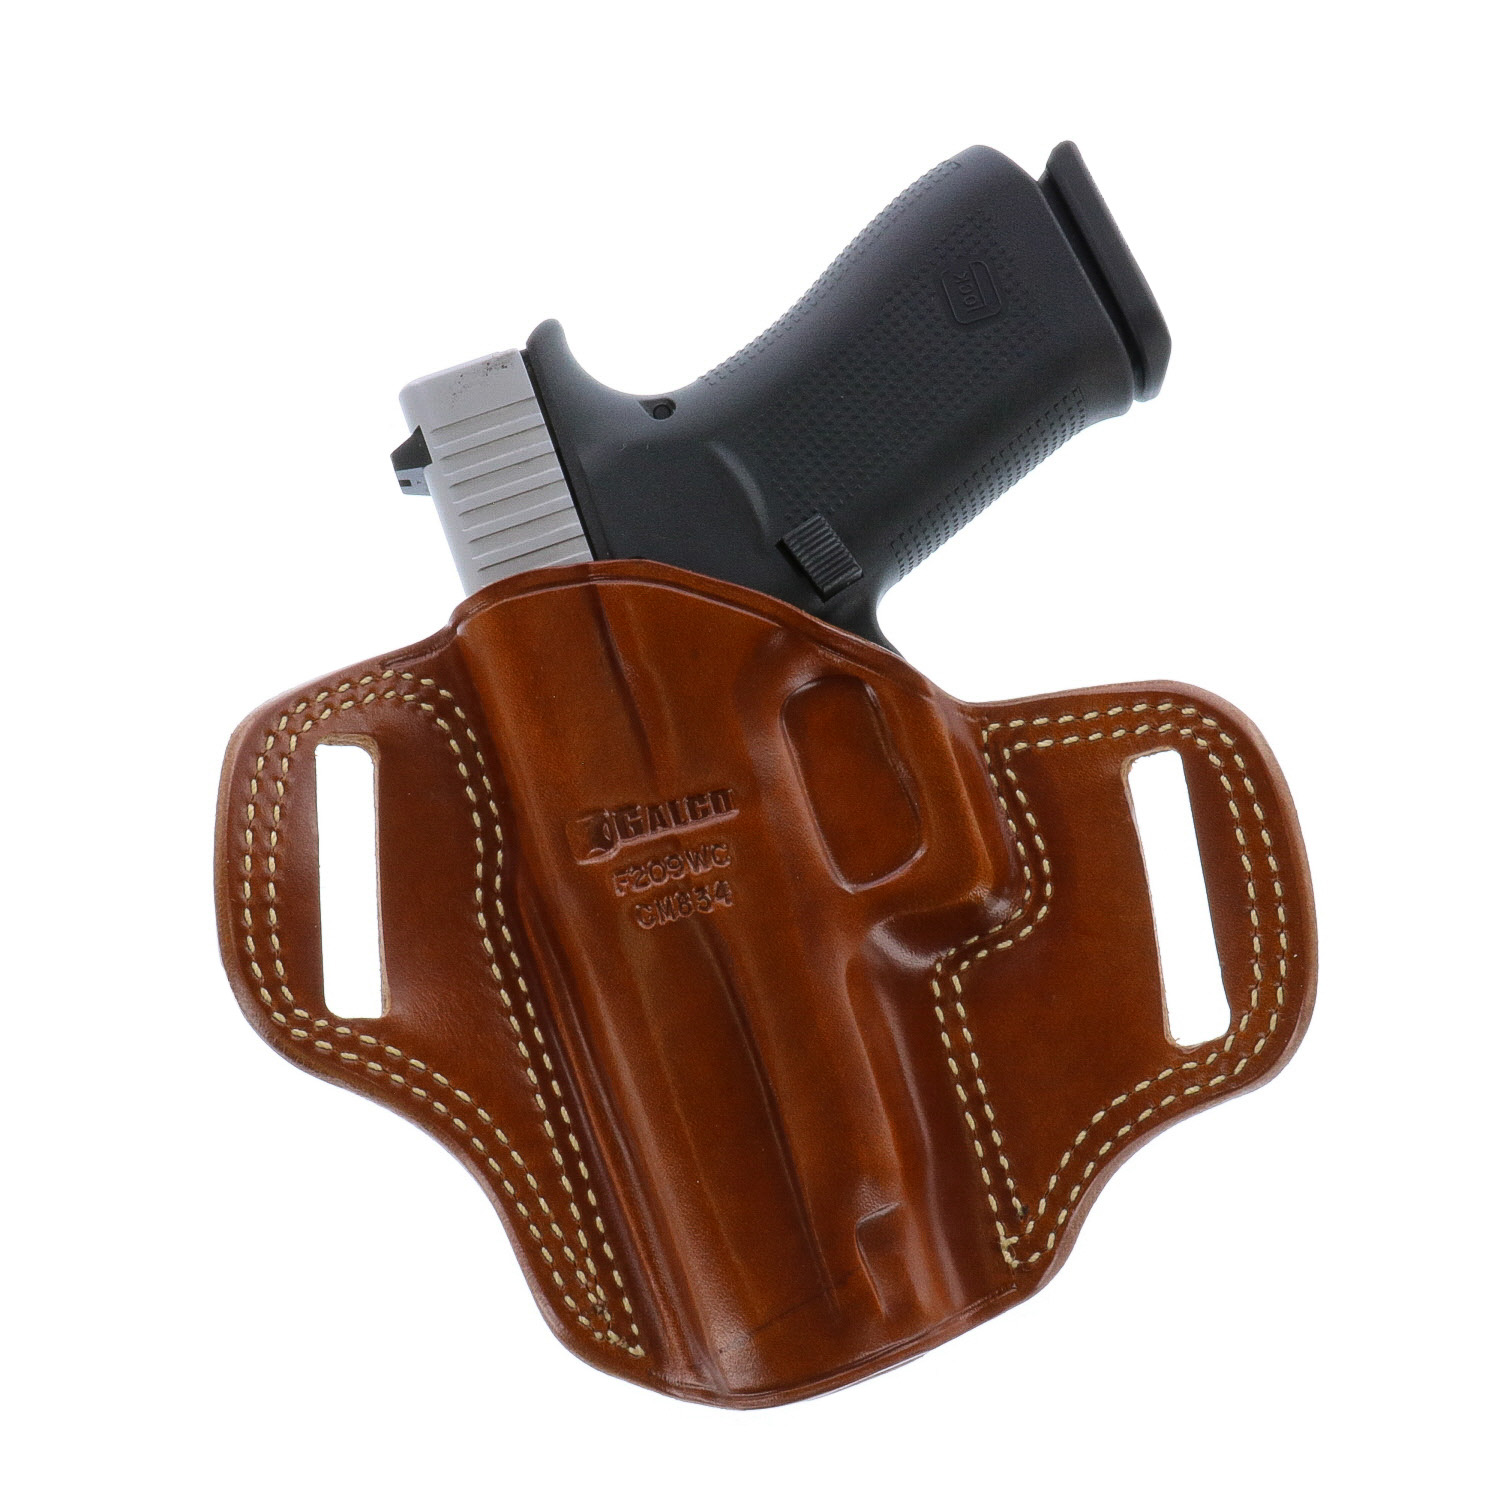 save money with deals Quick delivery Galco Gunleather Full Slide ...